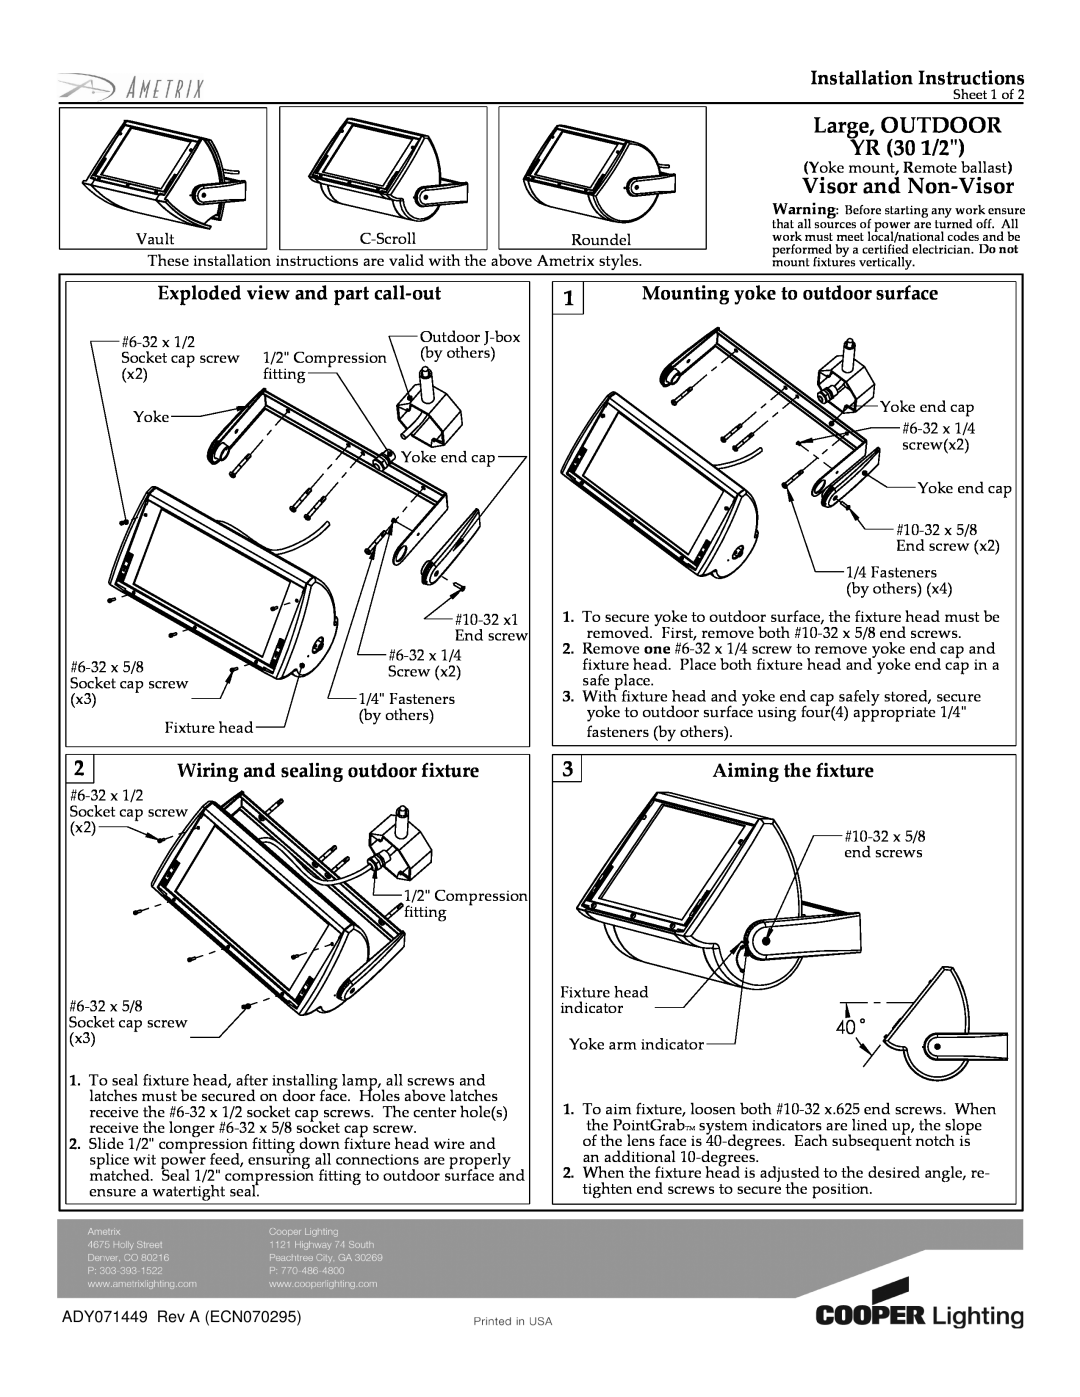 Cooper Lighting J/FE-CF-03 installation instructions Large, OUTDOOR YR 30 1/2, Visor and Non-Visor, Aiming the fixture 